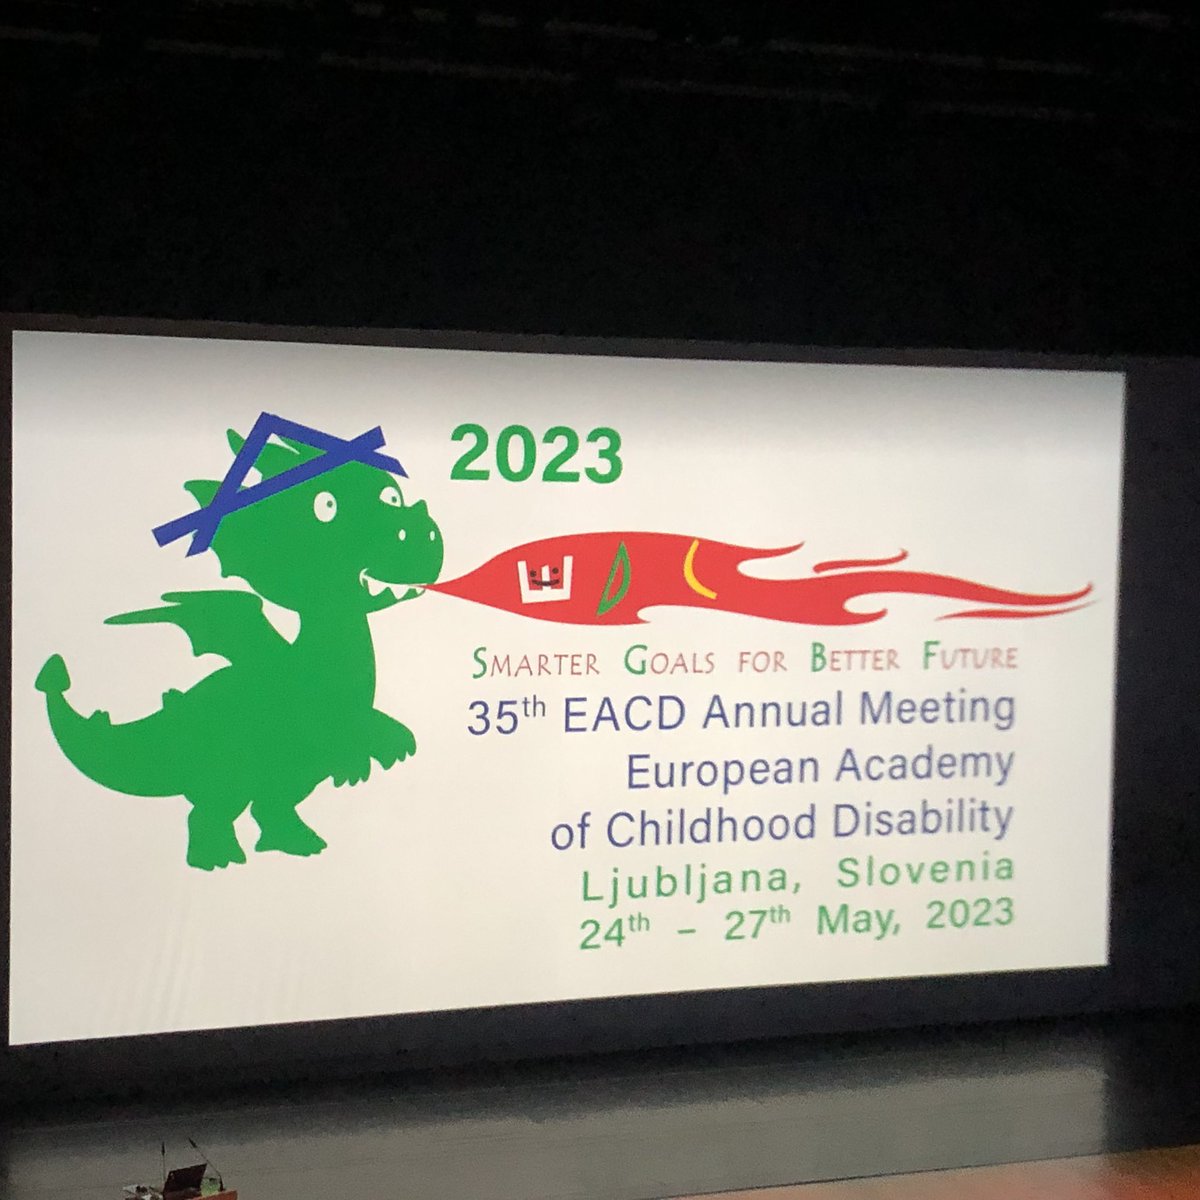 It’s been a fantastic few days @EACD2023 in Ljubljana. Congratulations to all the Irish representation, 4 oral presentations and 36 posters.